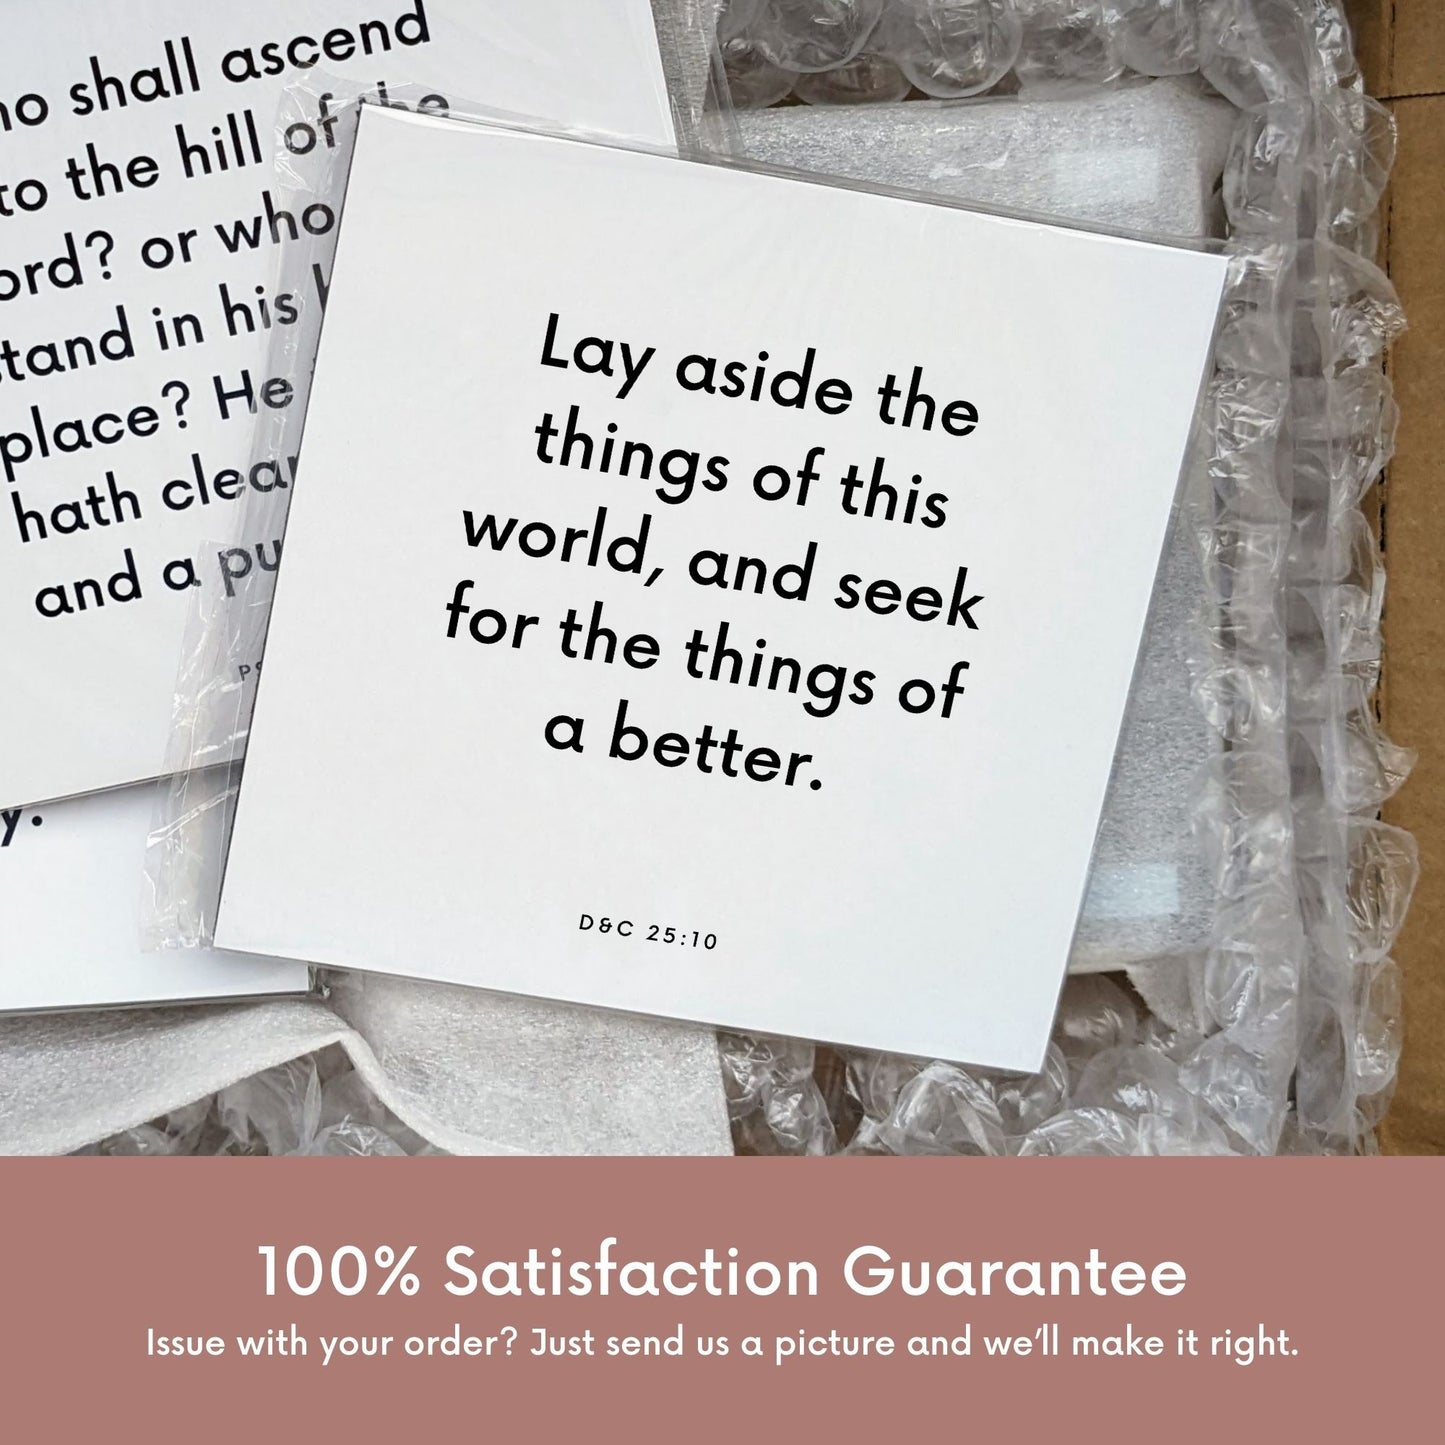 Shipping materials for scripture tile of D&C 25:10 - "Lay aside the things of this world"